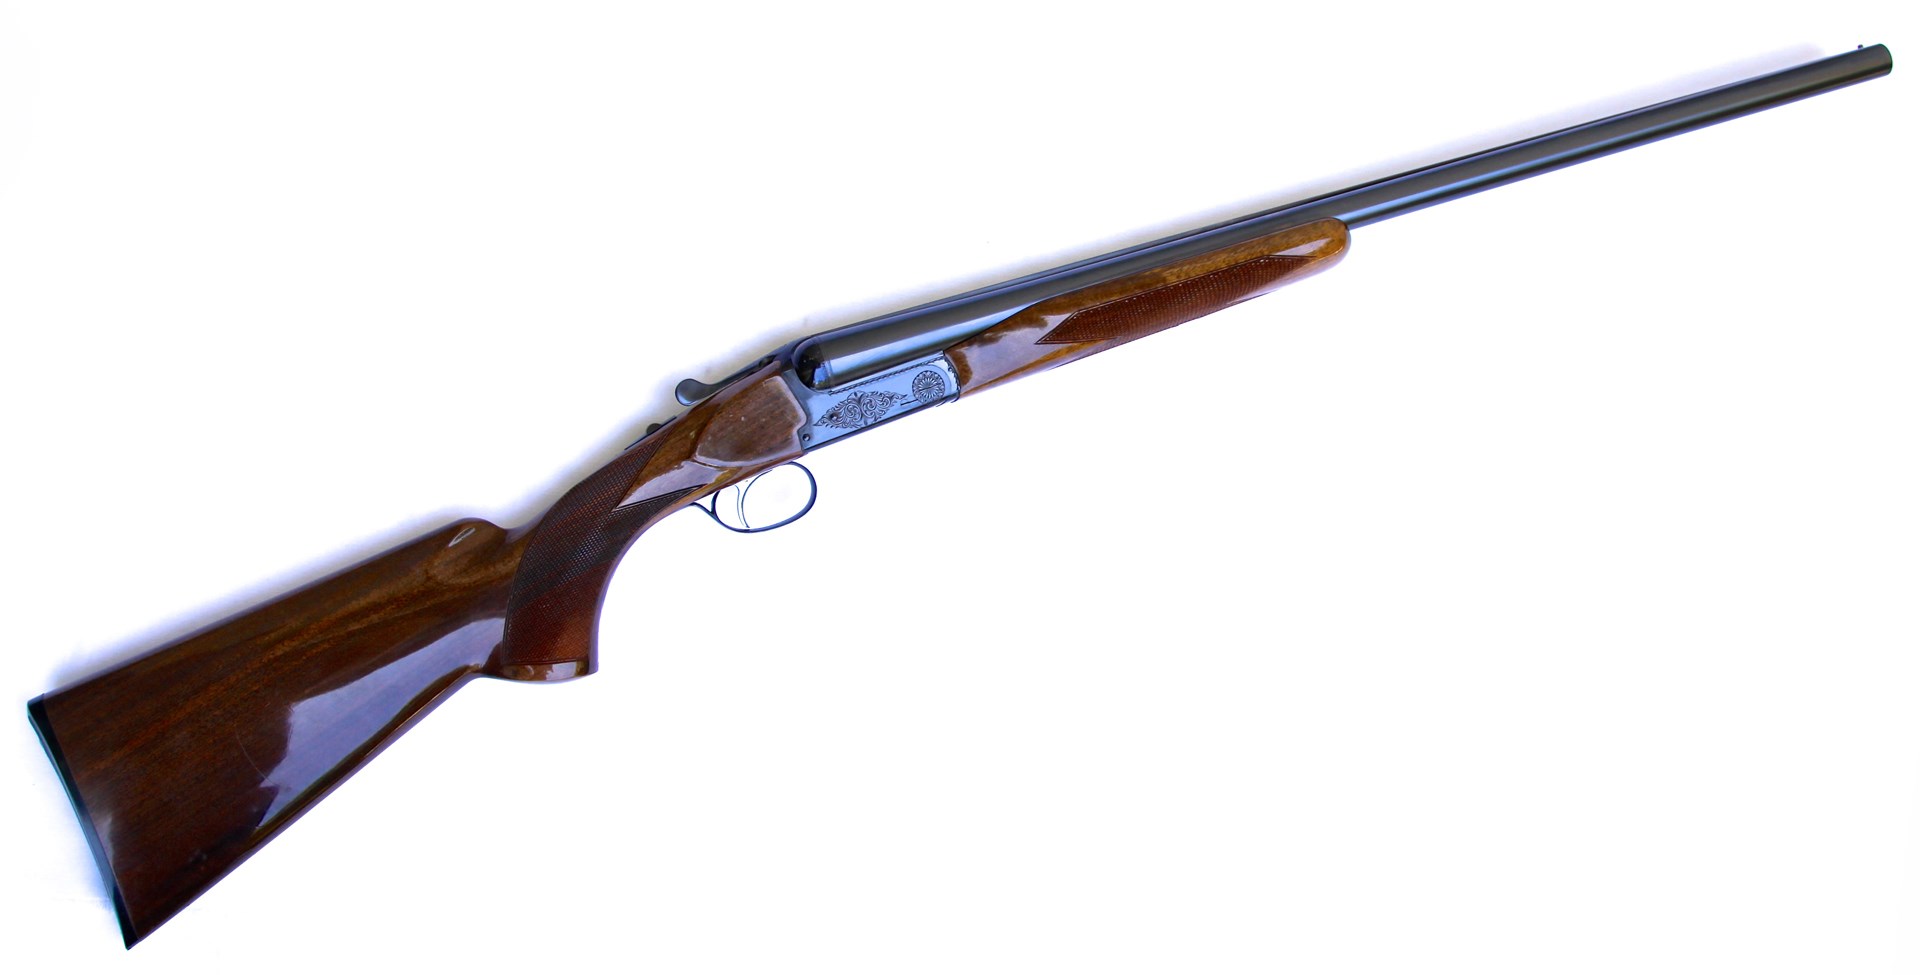 The Browning BSS side-by-side was an excellent shotgun that is no longer made. After writing a positive article about his test gun, the author returned it to the factory and later regretted his decision. He ended up buying this one, years later, on a Lock, Stock and Barrel online auction (lsbauctions.com).